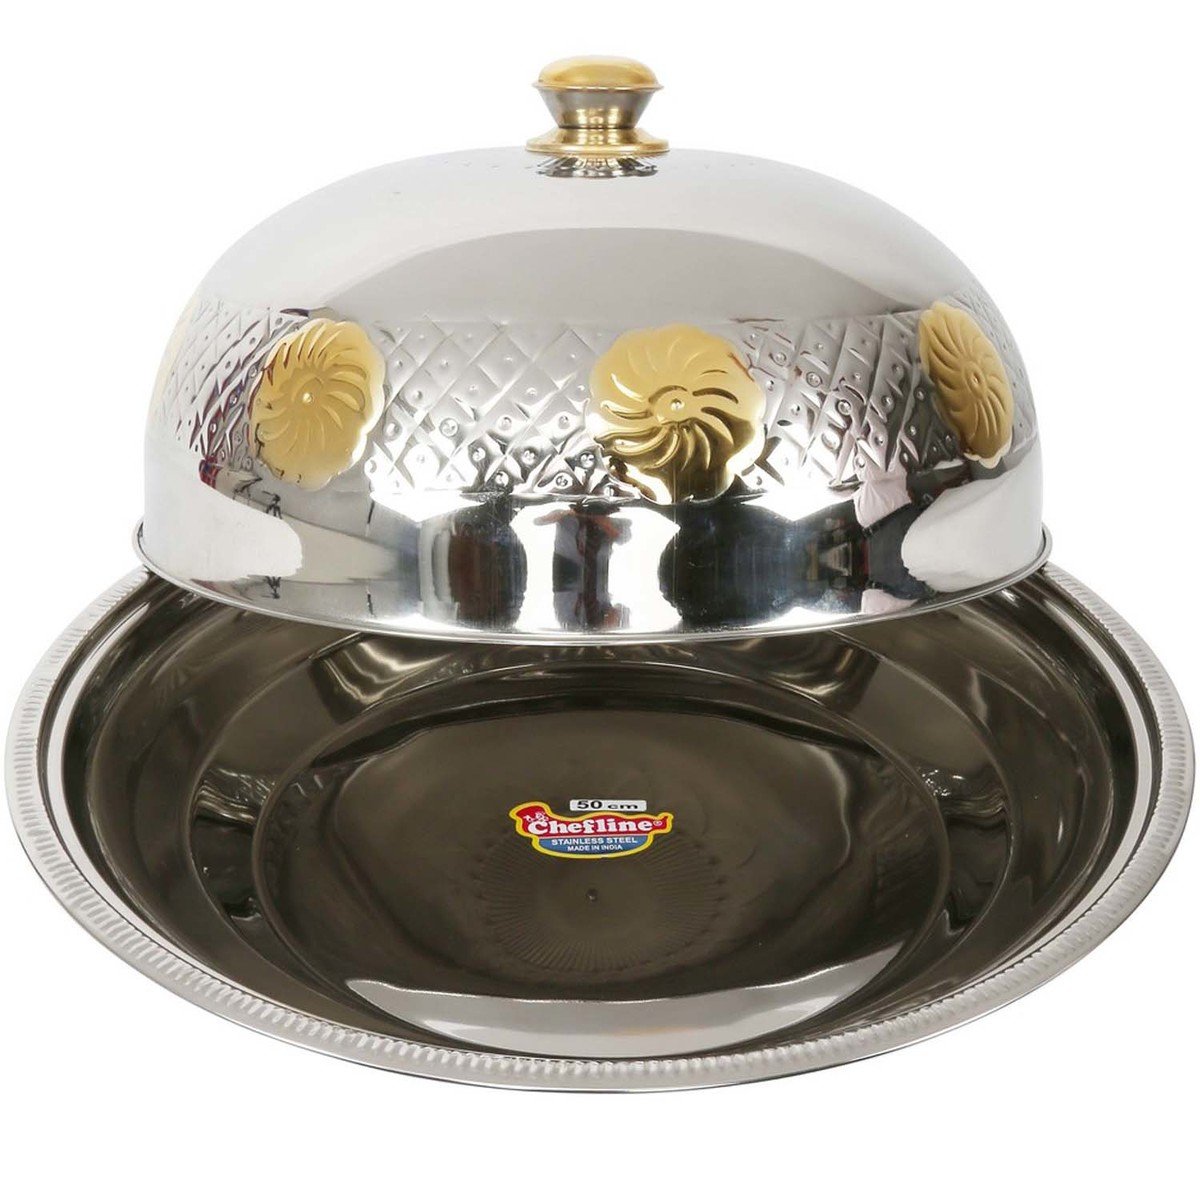 Chefline Stainless Steel Deluxe Round Cozy Gold 50cm